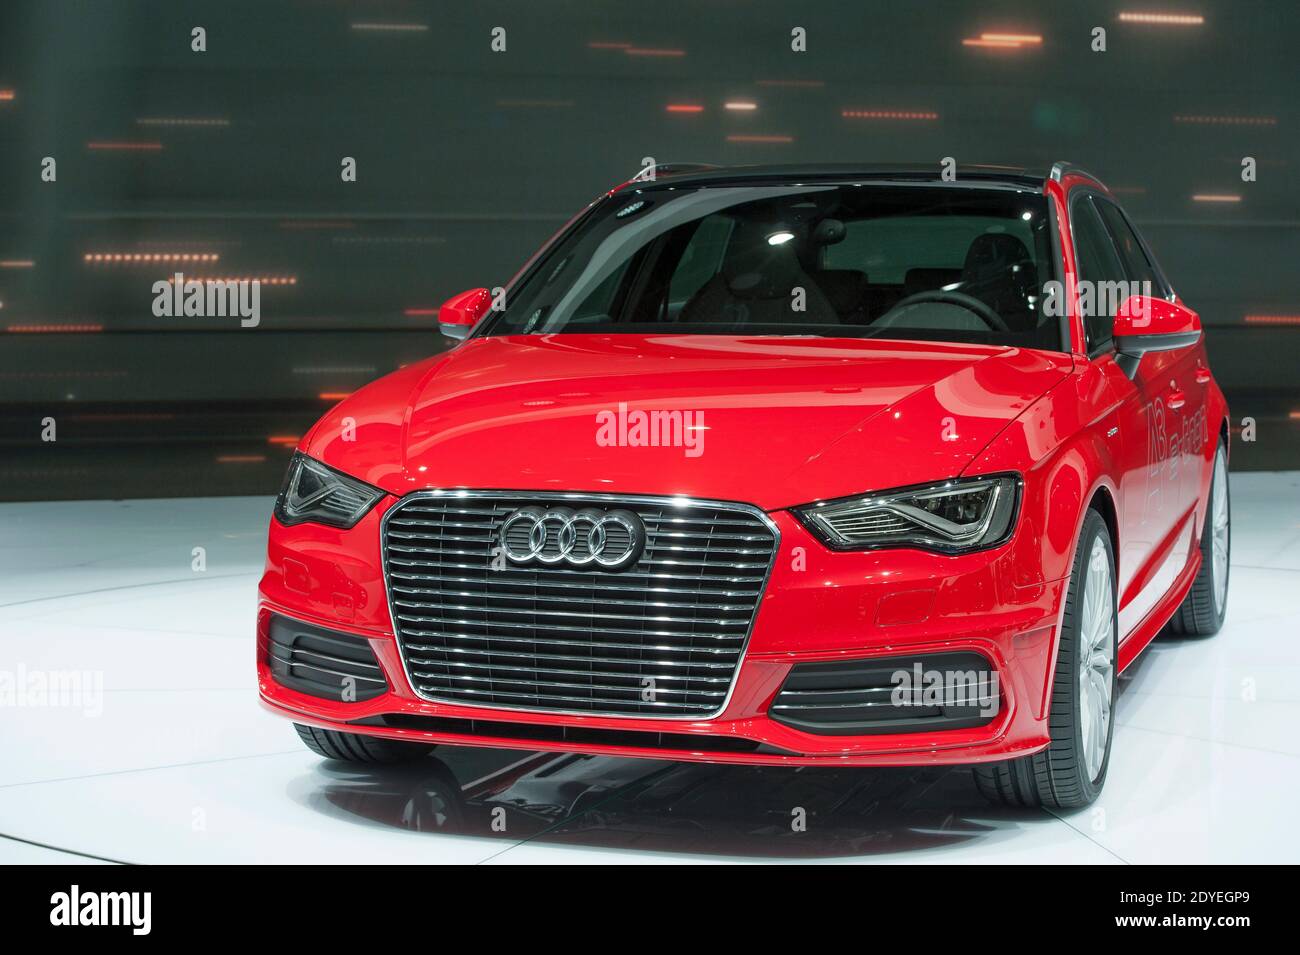 New Audi A3 e-tron concept pictured during the 83rd International Geneva  Motor Show, in Geneva, Switzerland on March 6, 2013. Photo by Gilles  Bertrand/ABACAPRESS.COM Stock Photo - Alamy